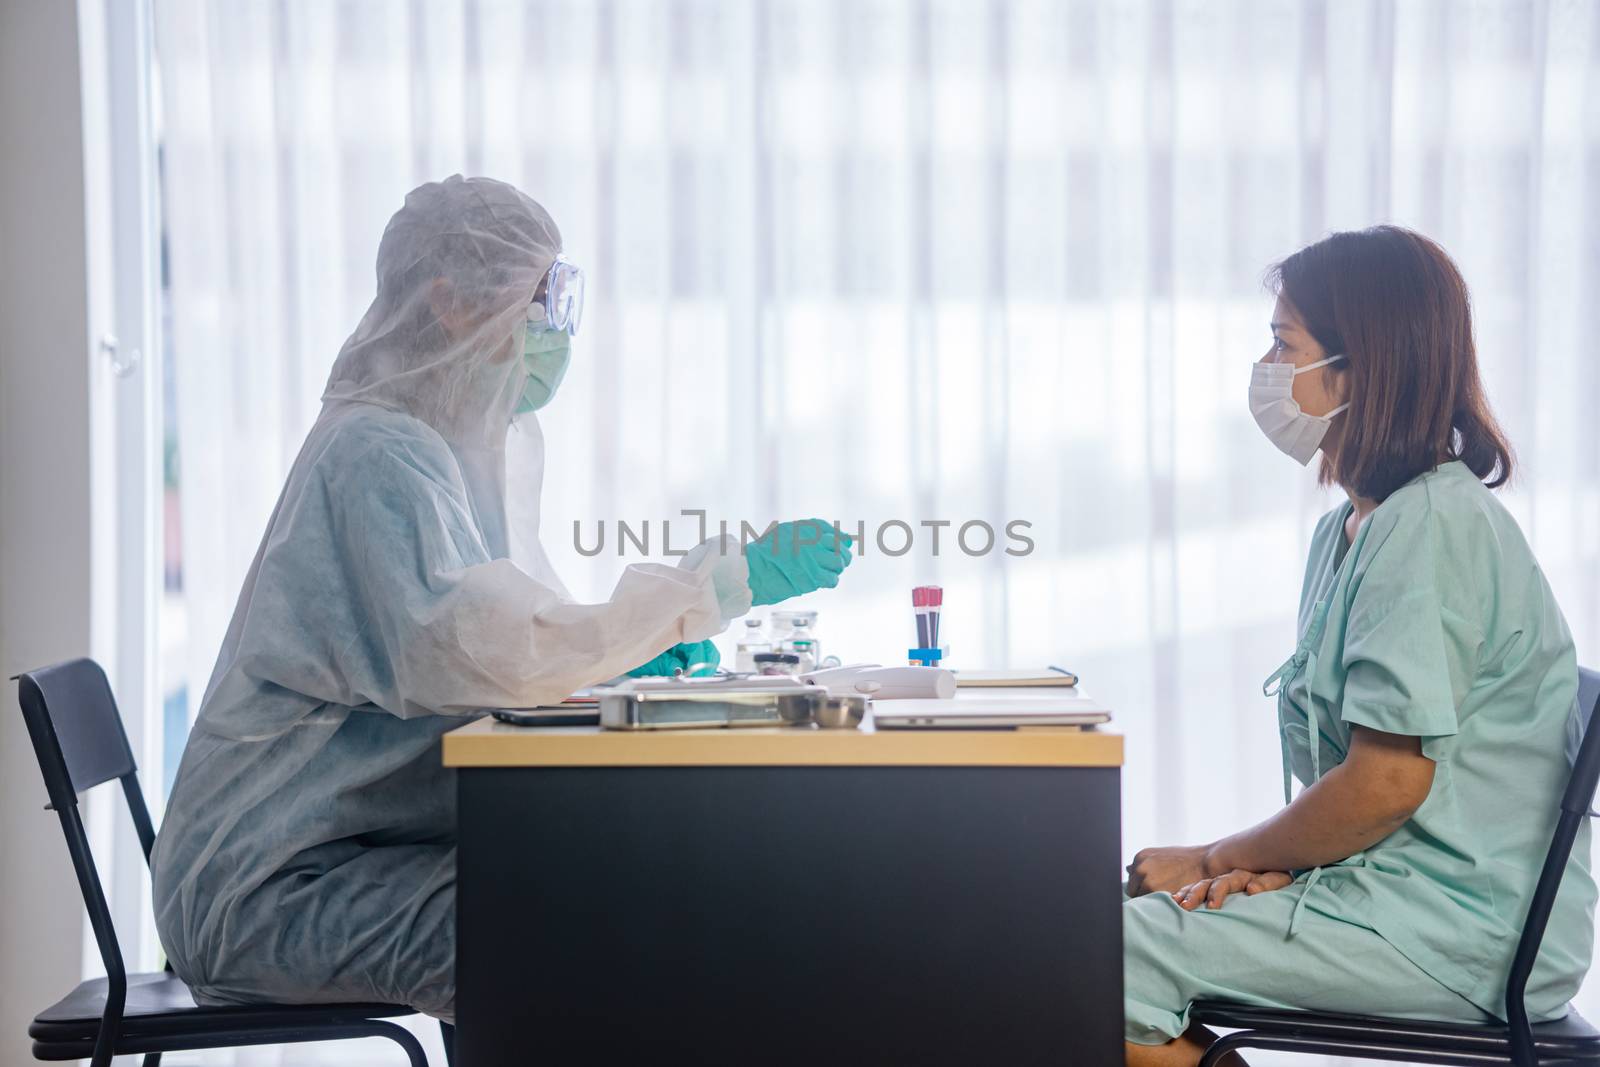 Asian Female Patient Being Reassured By Woman Doctor In Hospital by sandyman